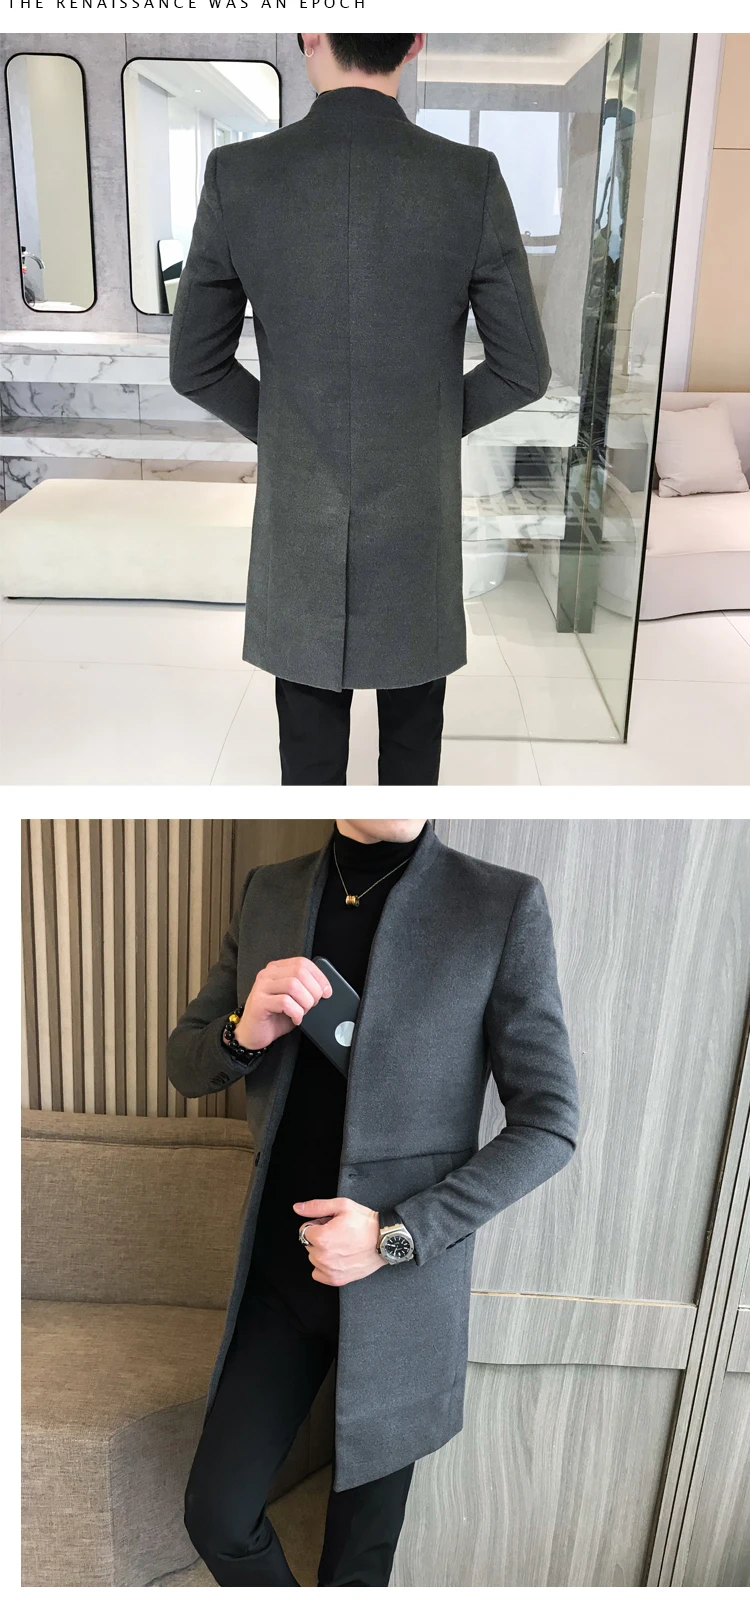 New Winter Woolen cloth overcoat Mens Single Button Coats Fashion Men Solid Business Casual Long Trench Jacket